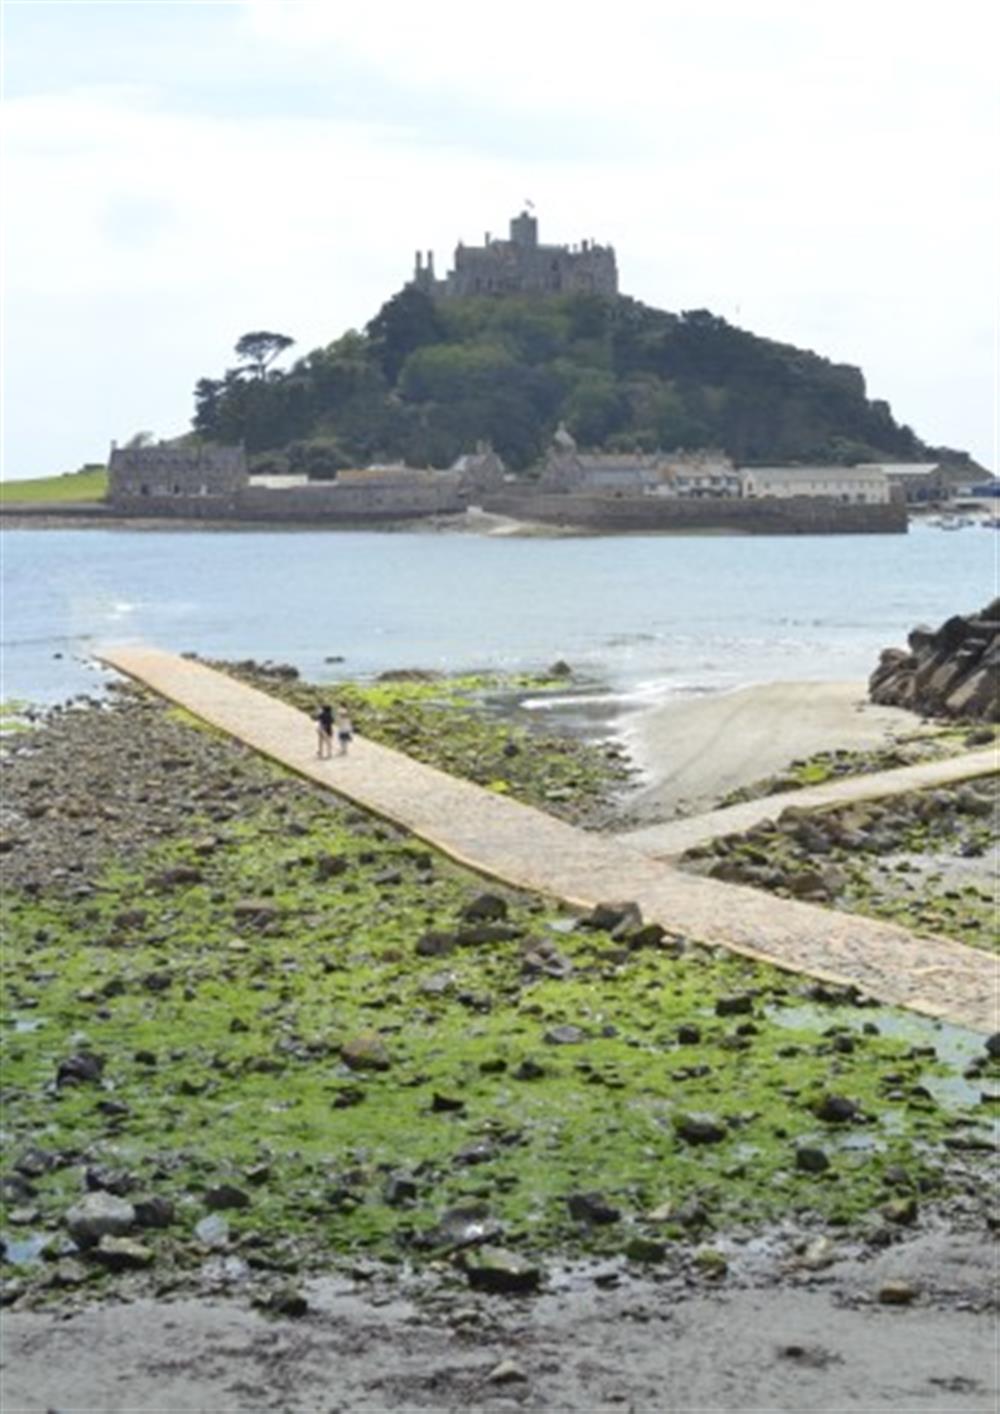 St Michael's Mount is less than an hour's drive.